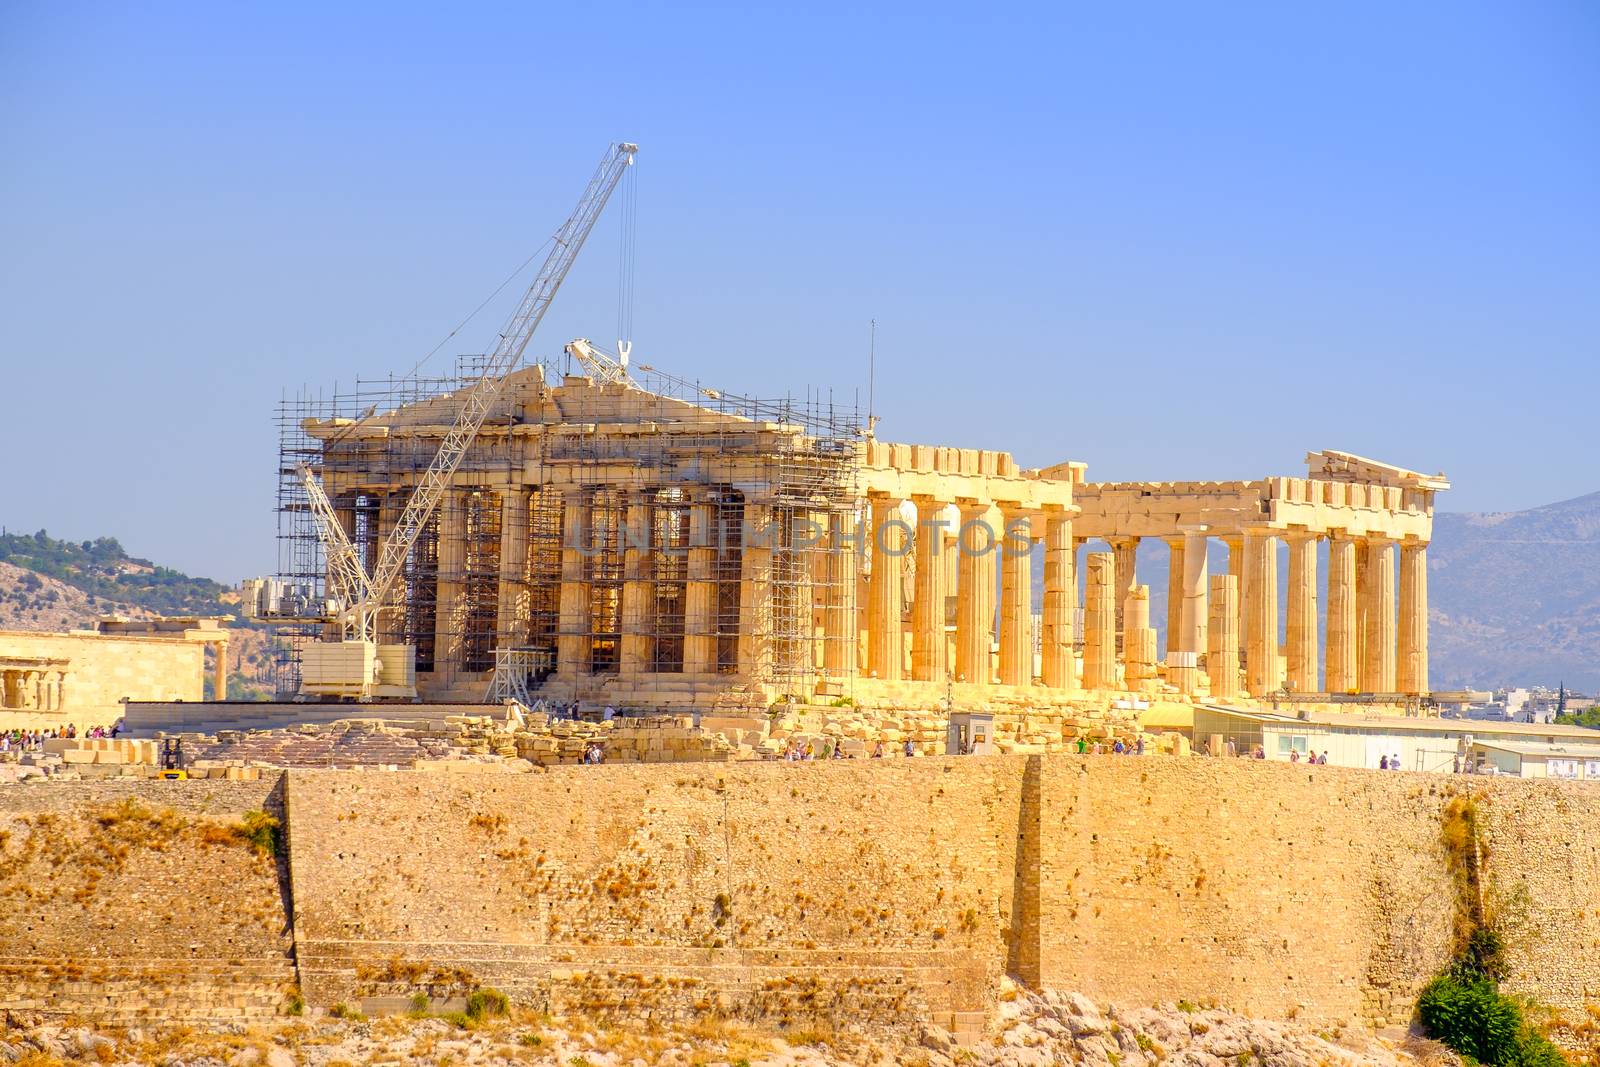 Scenic view of ancient Pantheon temple in Acropolis under construction, Athens, Greece